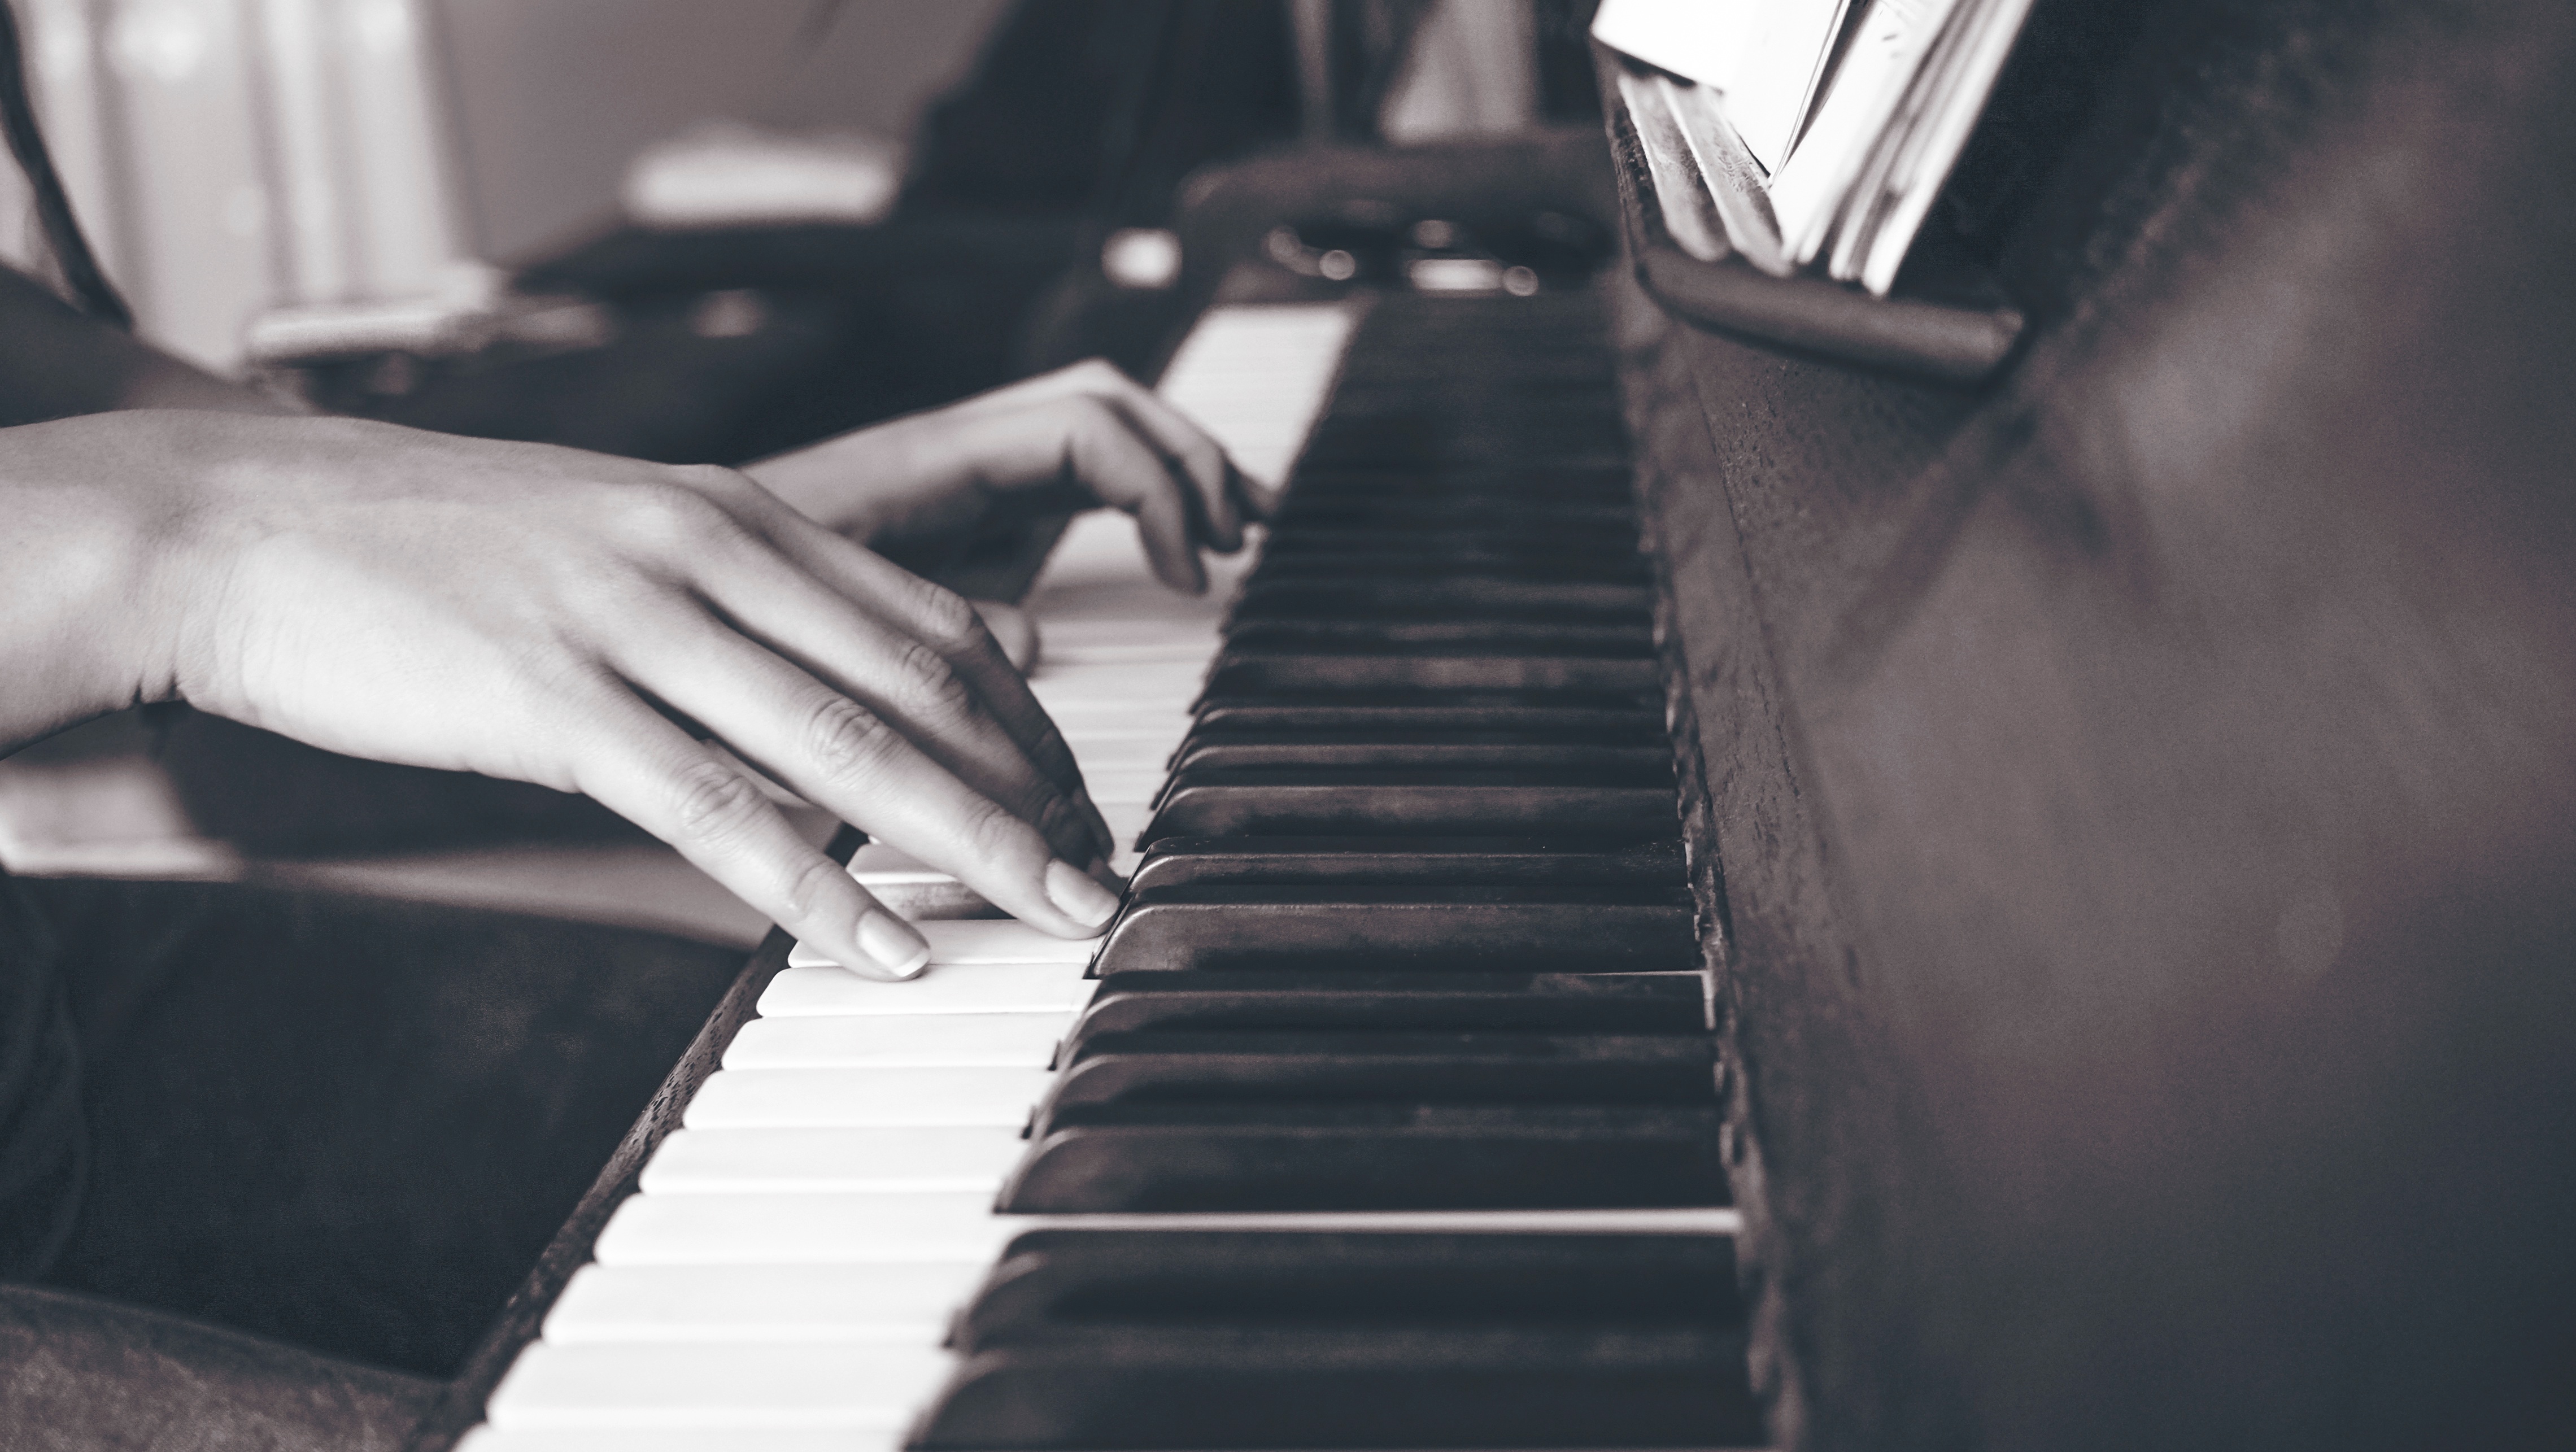 bw, piano, music, hands, chb, keys cell phone wallpapers